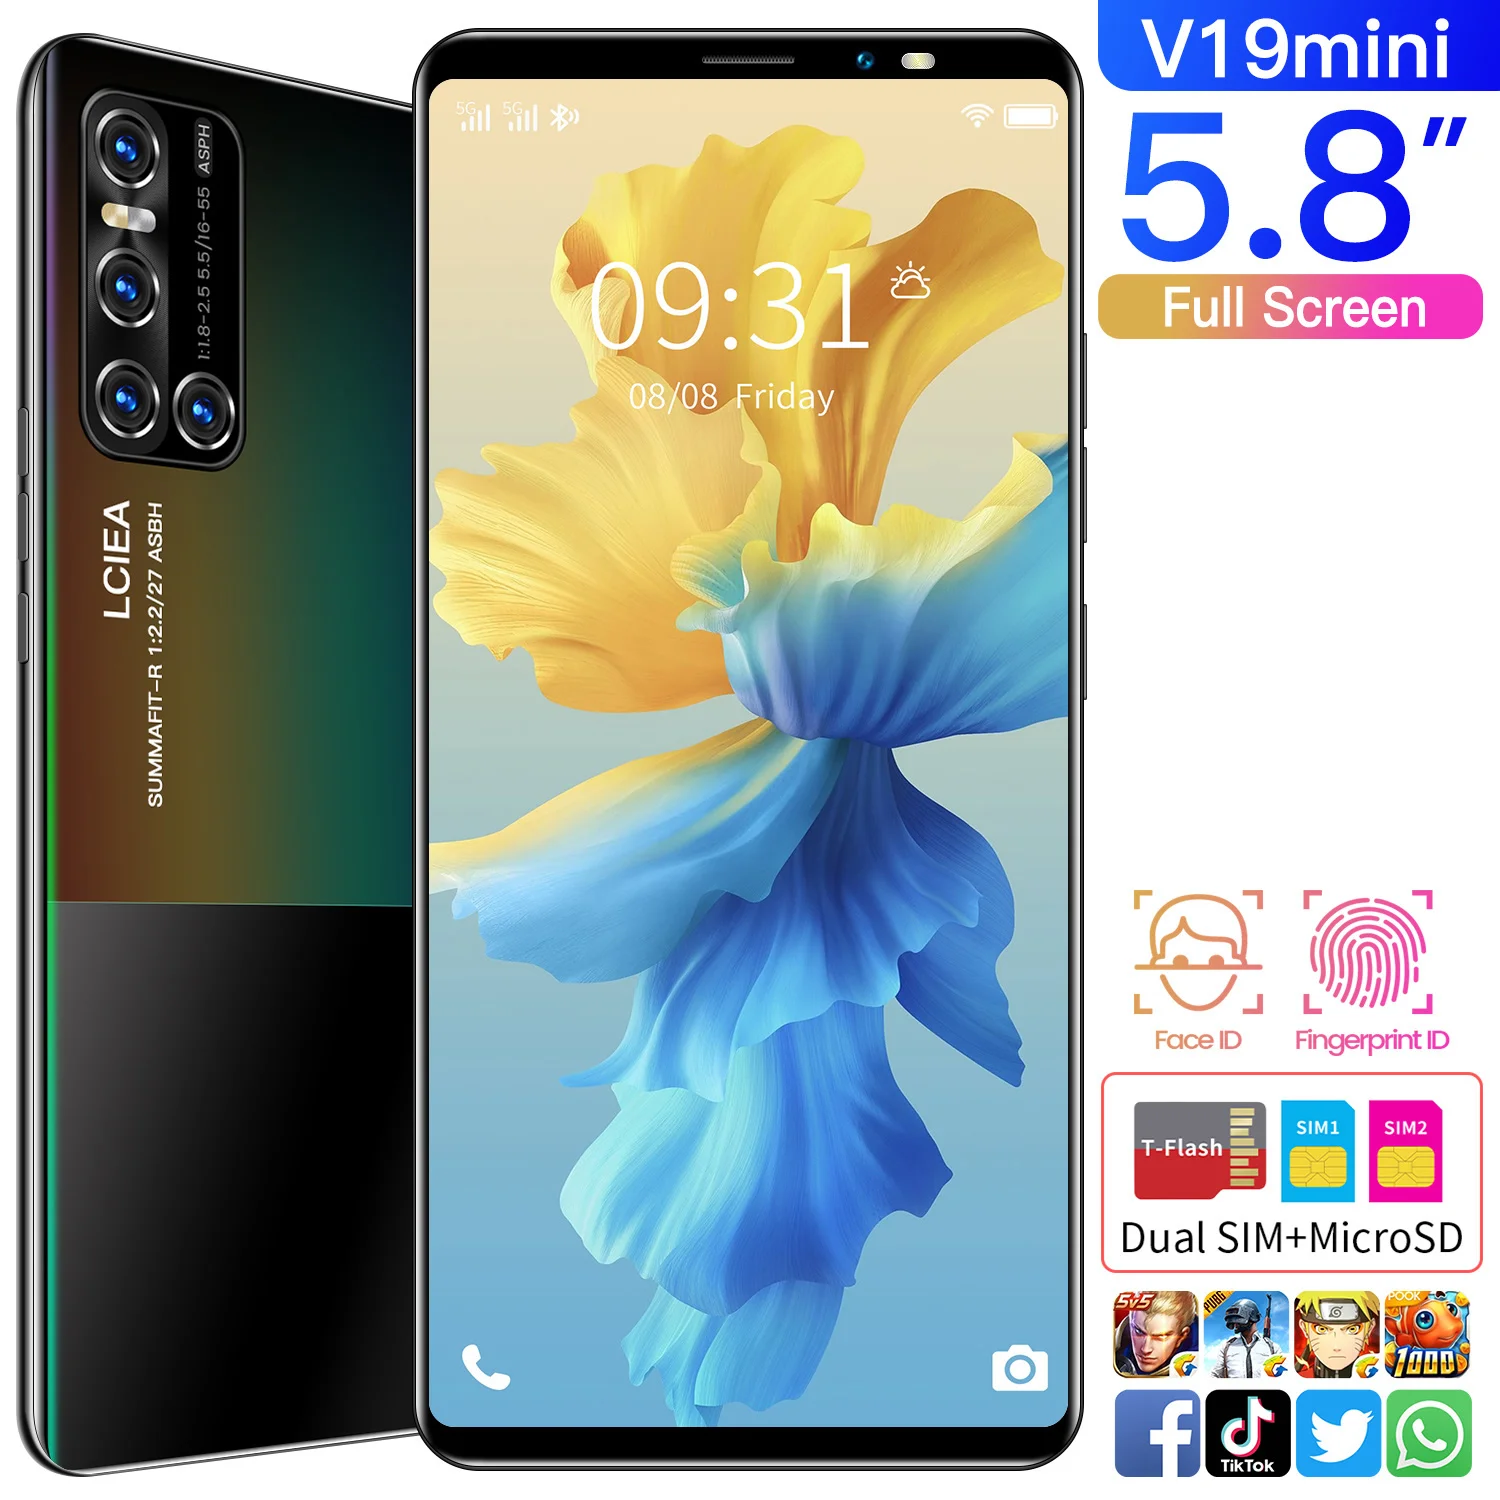 

Cheapest 3G WCDMA SmartPhone 5.8 Inch Full Screen Smart Phone Android 4.4 512MB RAM+4GB Unlocked Dual Sim Mobile Phone